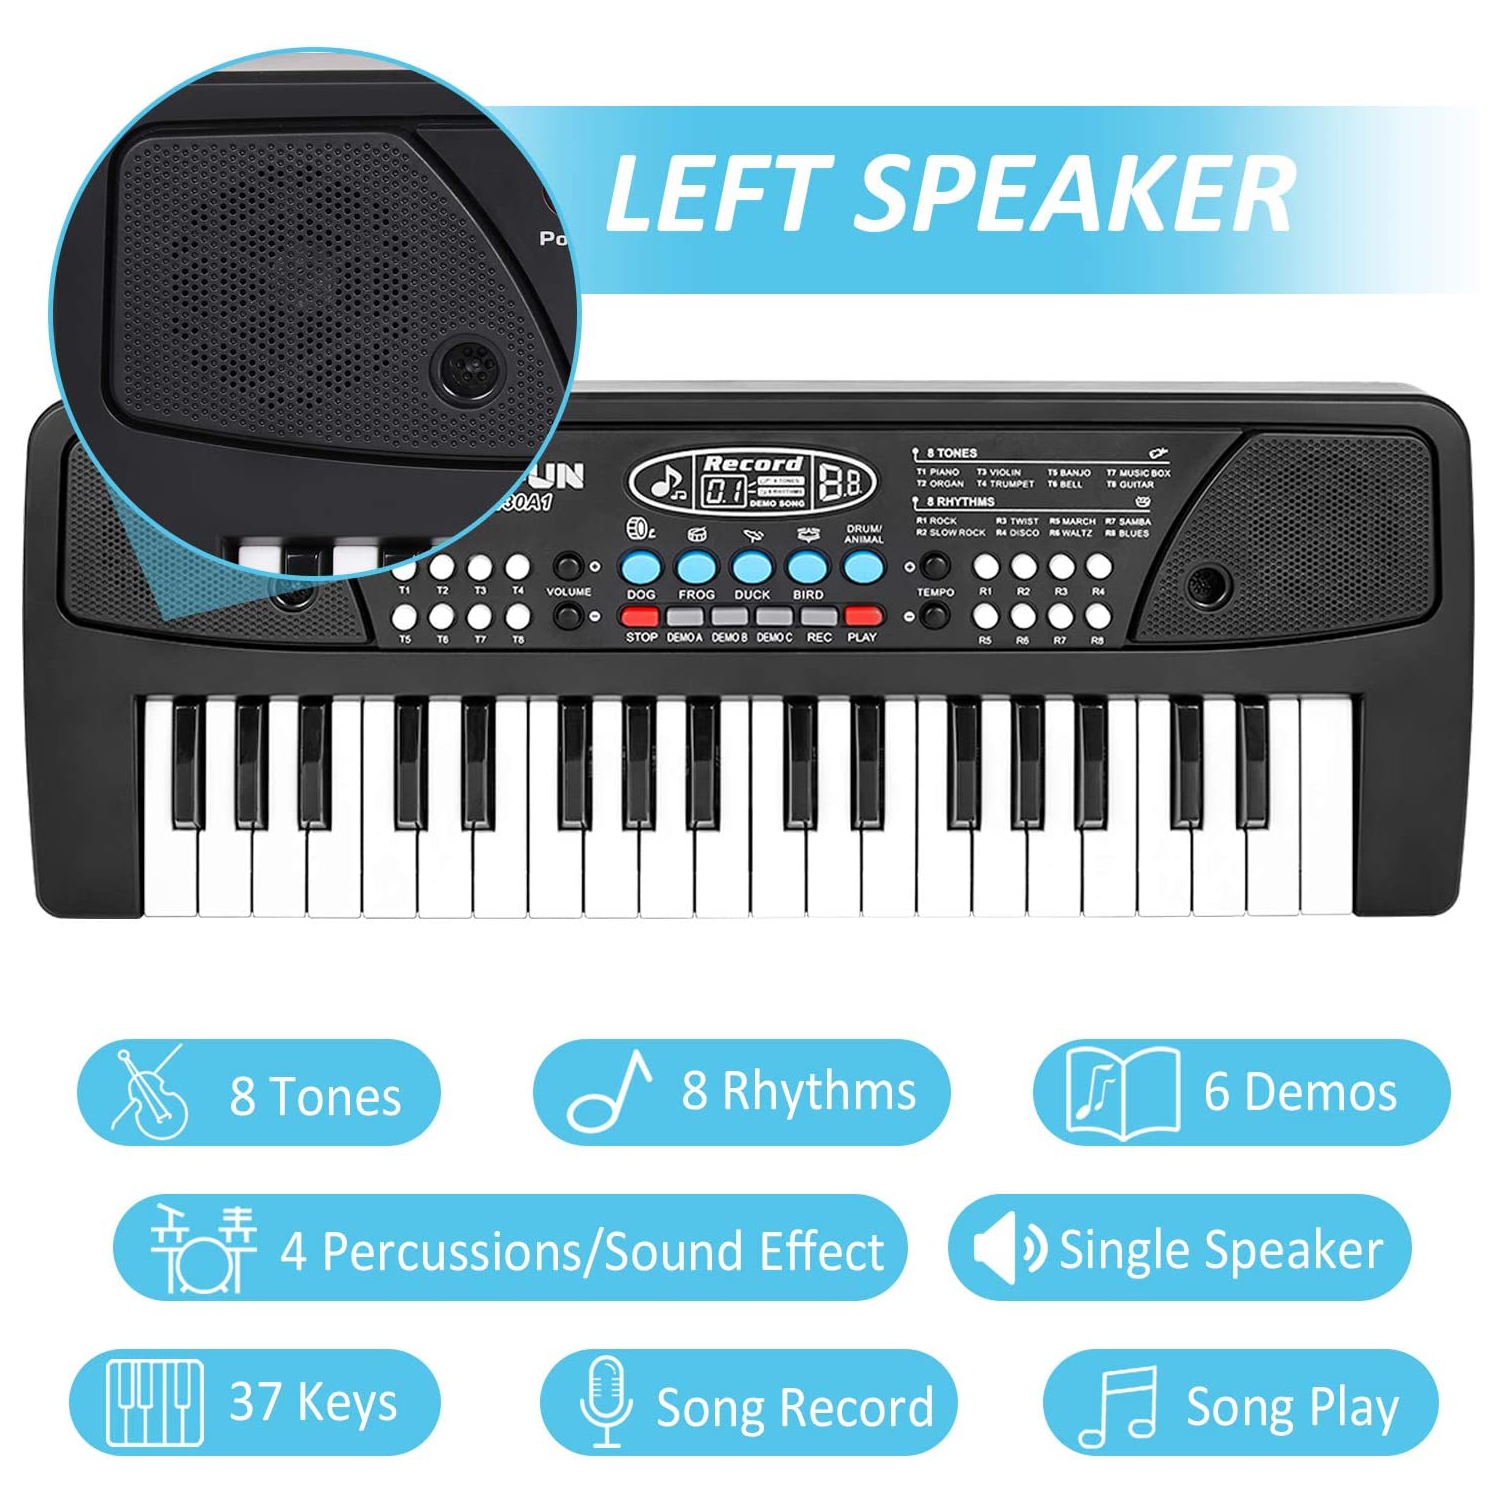 TWFRIC Kids Piano Keyboard 37 Keys Piano for Kids Music Piano Keyboard Multifunction Keyboard Teaching Toys with Microphone MP3 Music Function for Beginners Children Age 3-8 Year Old 